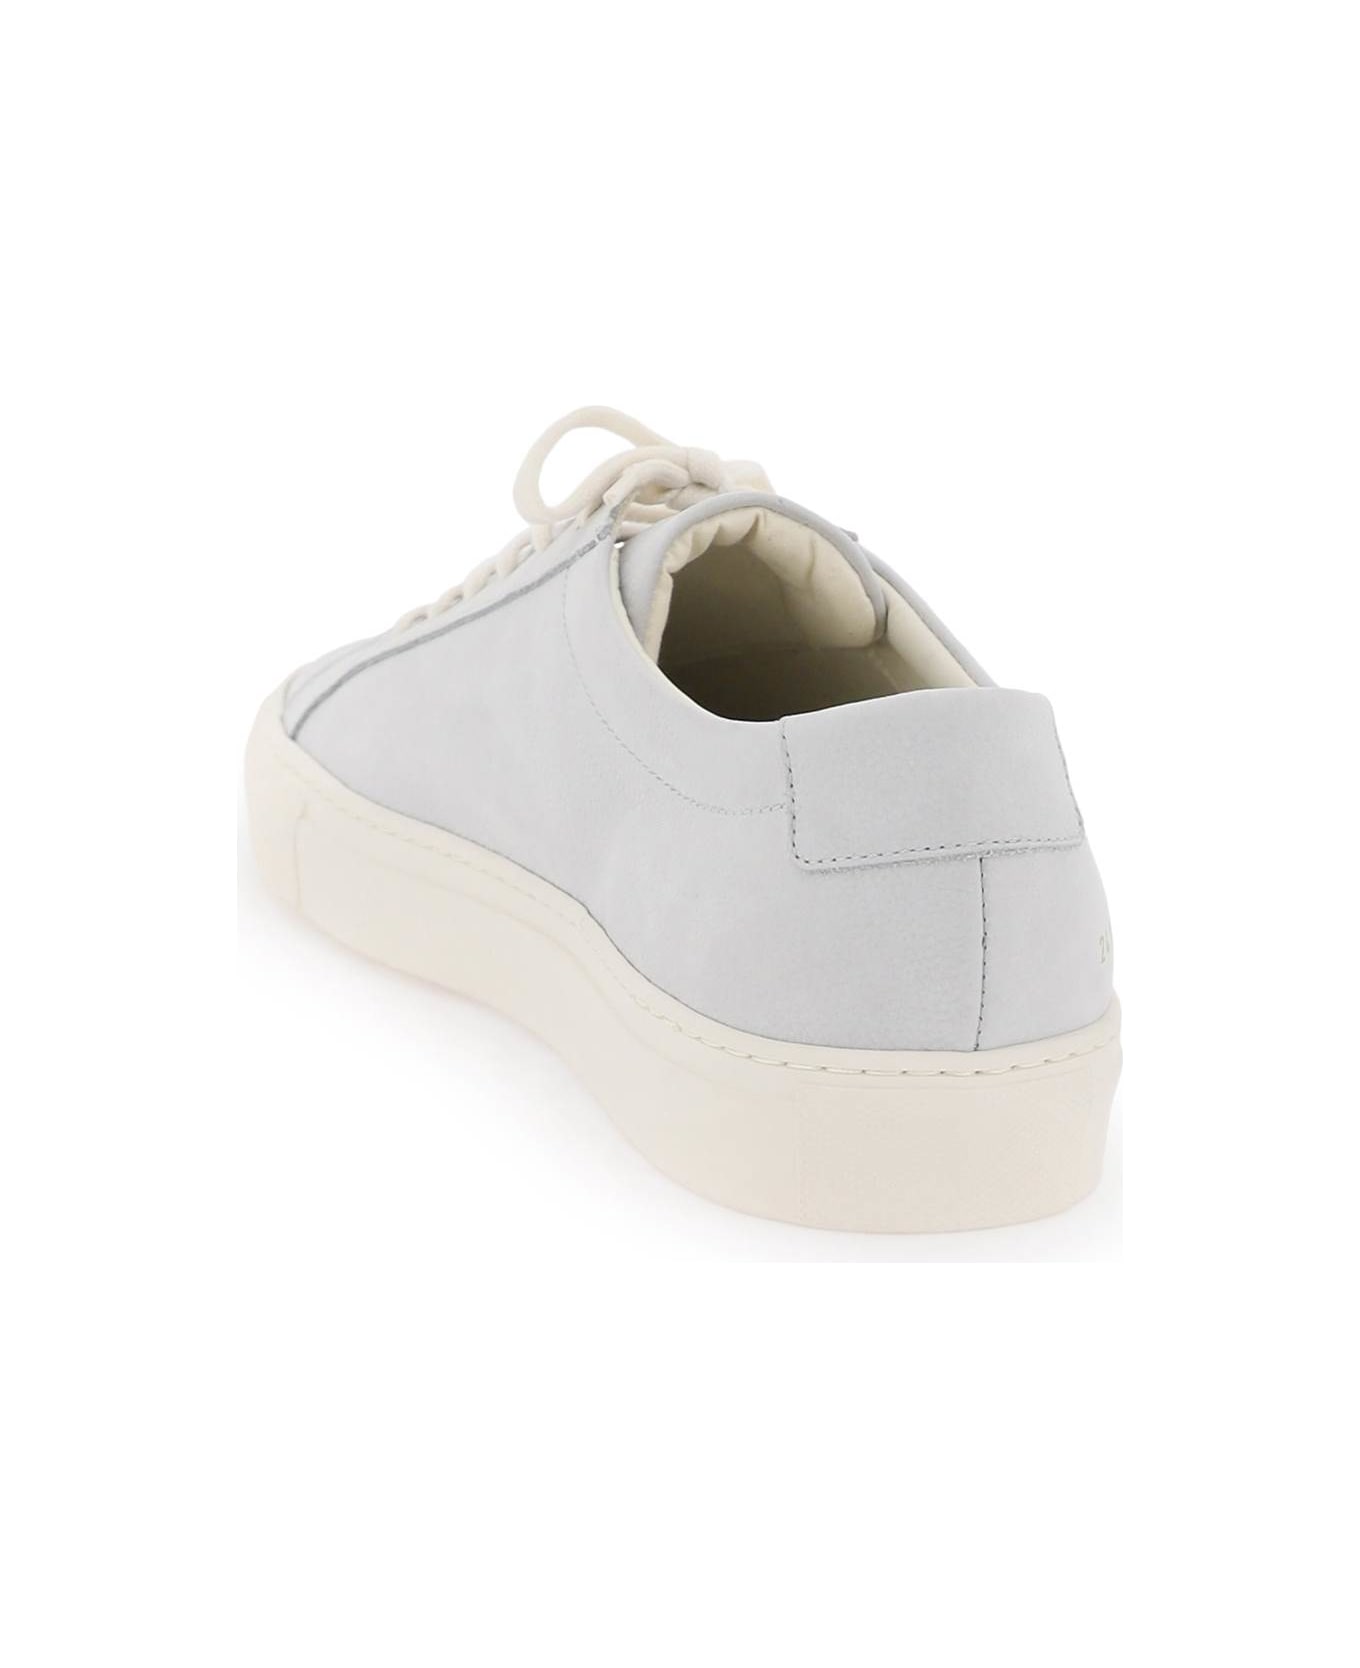 Common Projects Original Achilles Sneakers - GREY (Grey)